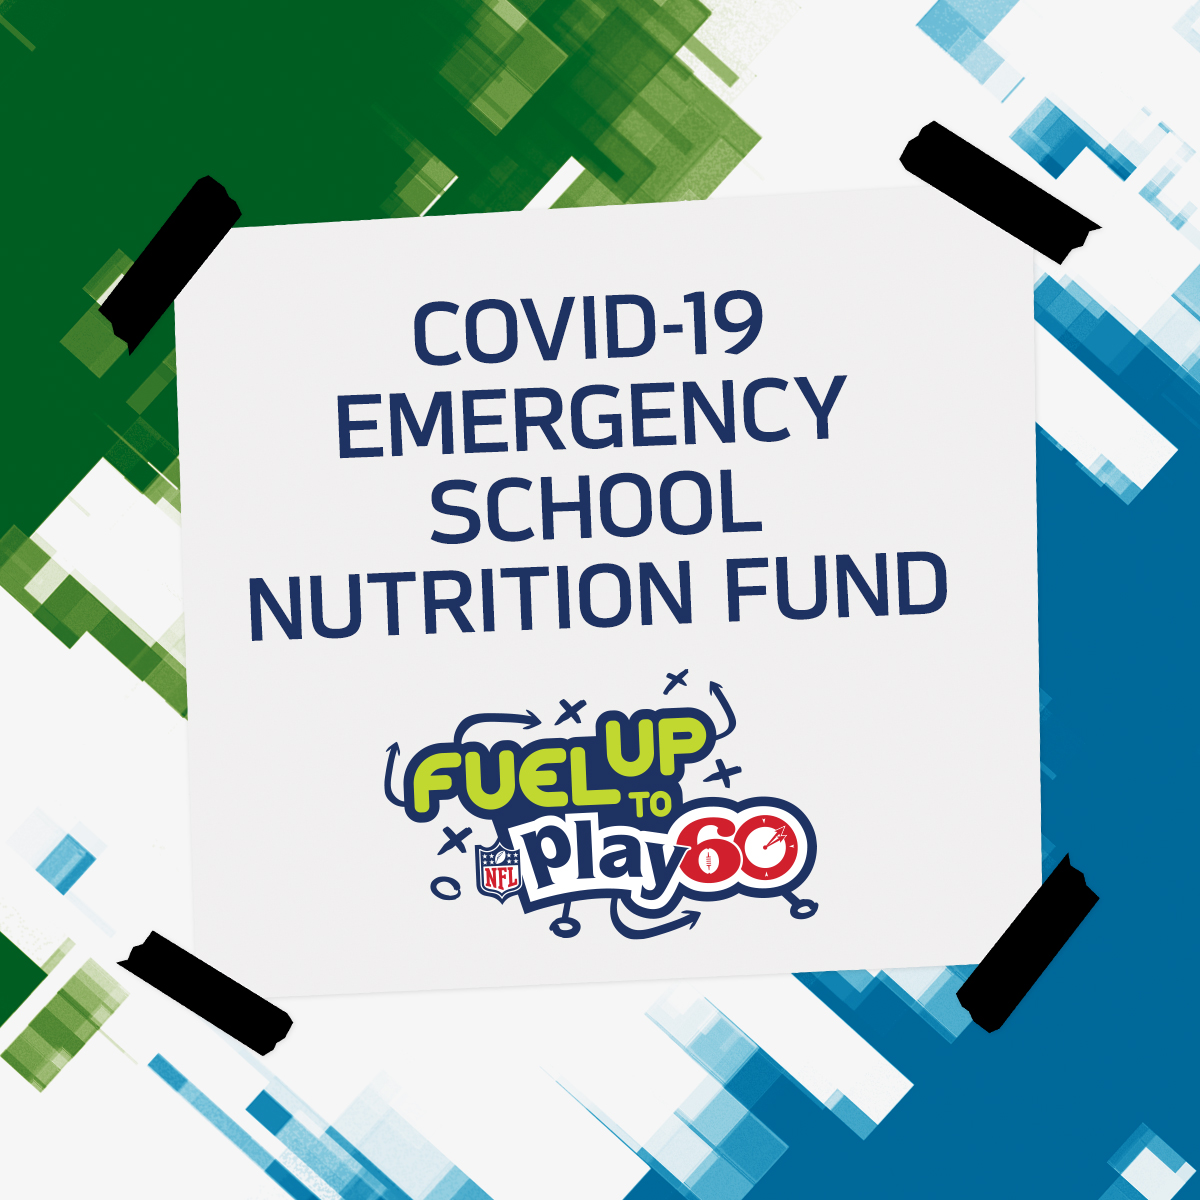 Our friends @DairyMAX are partnering with @FuelUptoPlay60 & @GENYOUthOrg to help schools get meals to students during COVID-19. If your school is in need apply now for a grant of up to $3K to use for serving equipment, coolers or protective gear! covid-19.genyouthnow.org